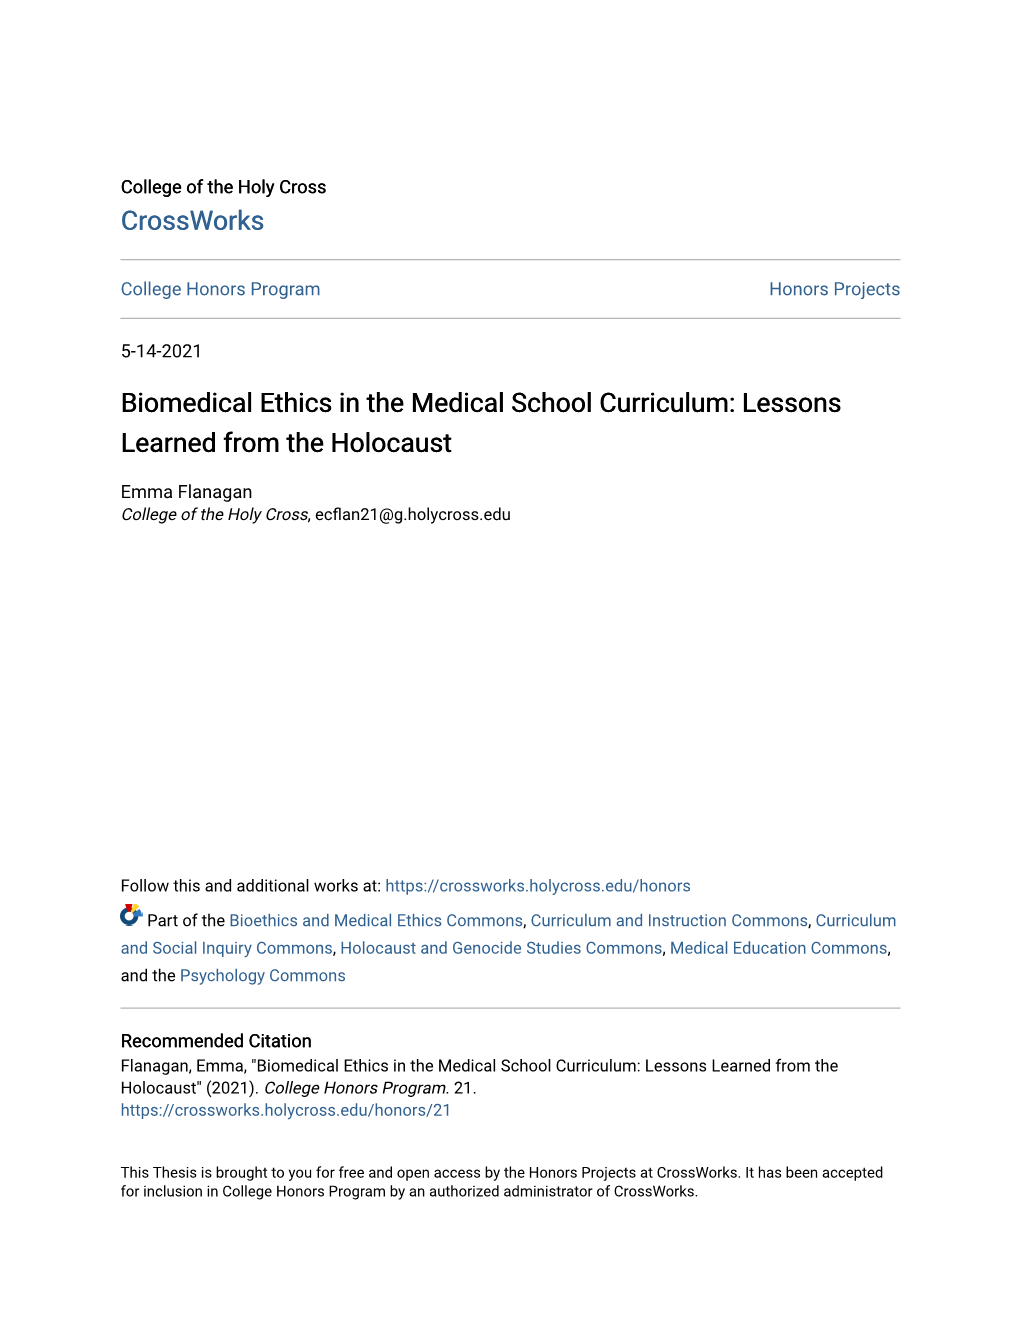 Biomedical Ethics in the Medical School Curriculum: Lessons Learned from the Holocaust